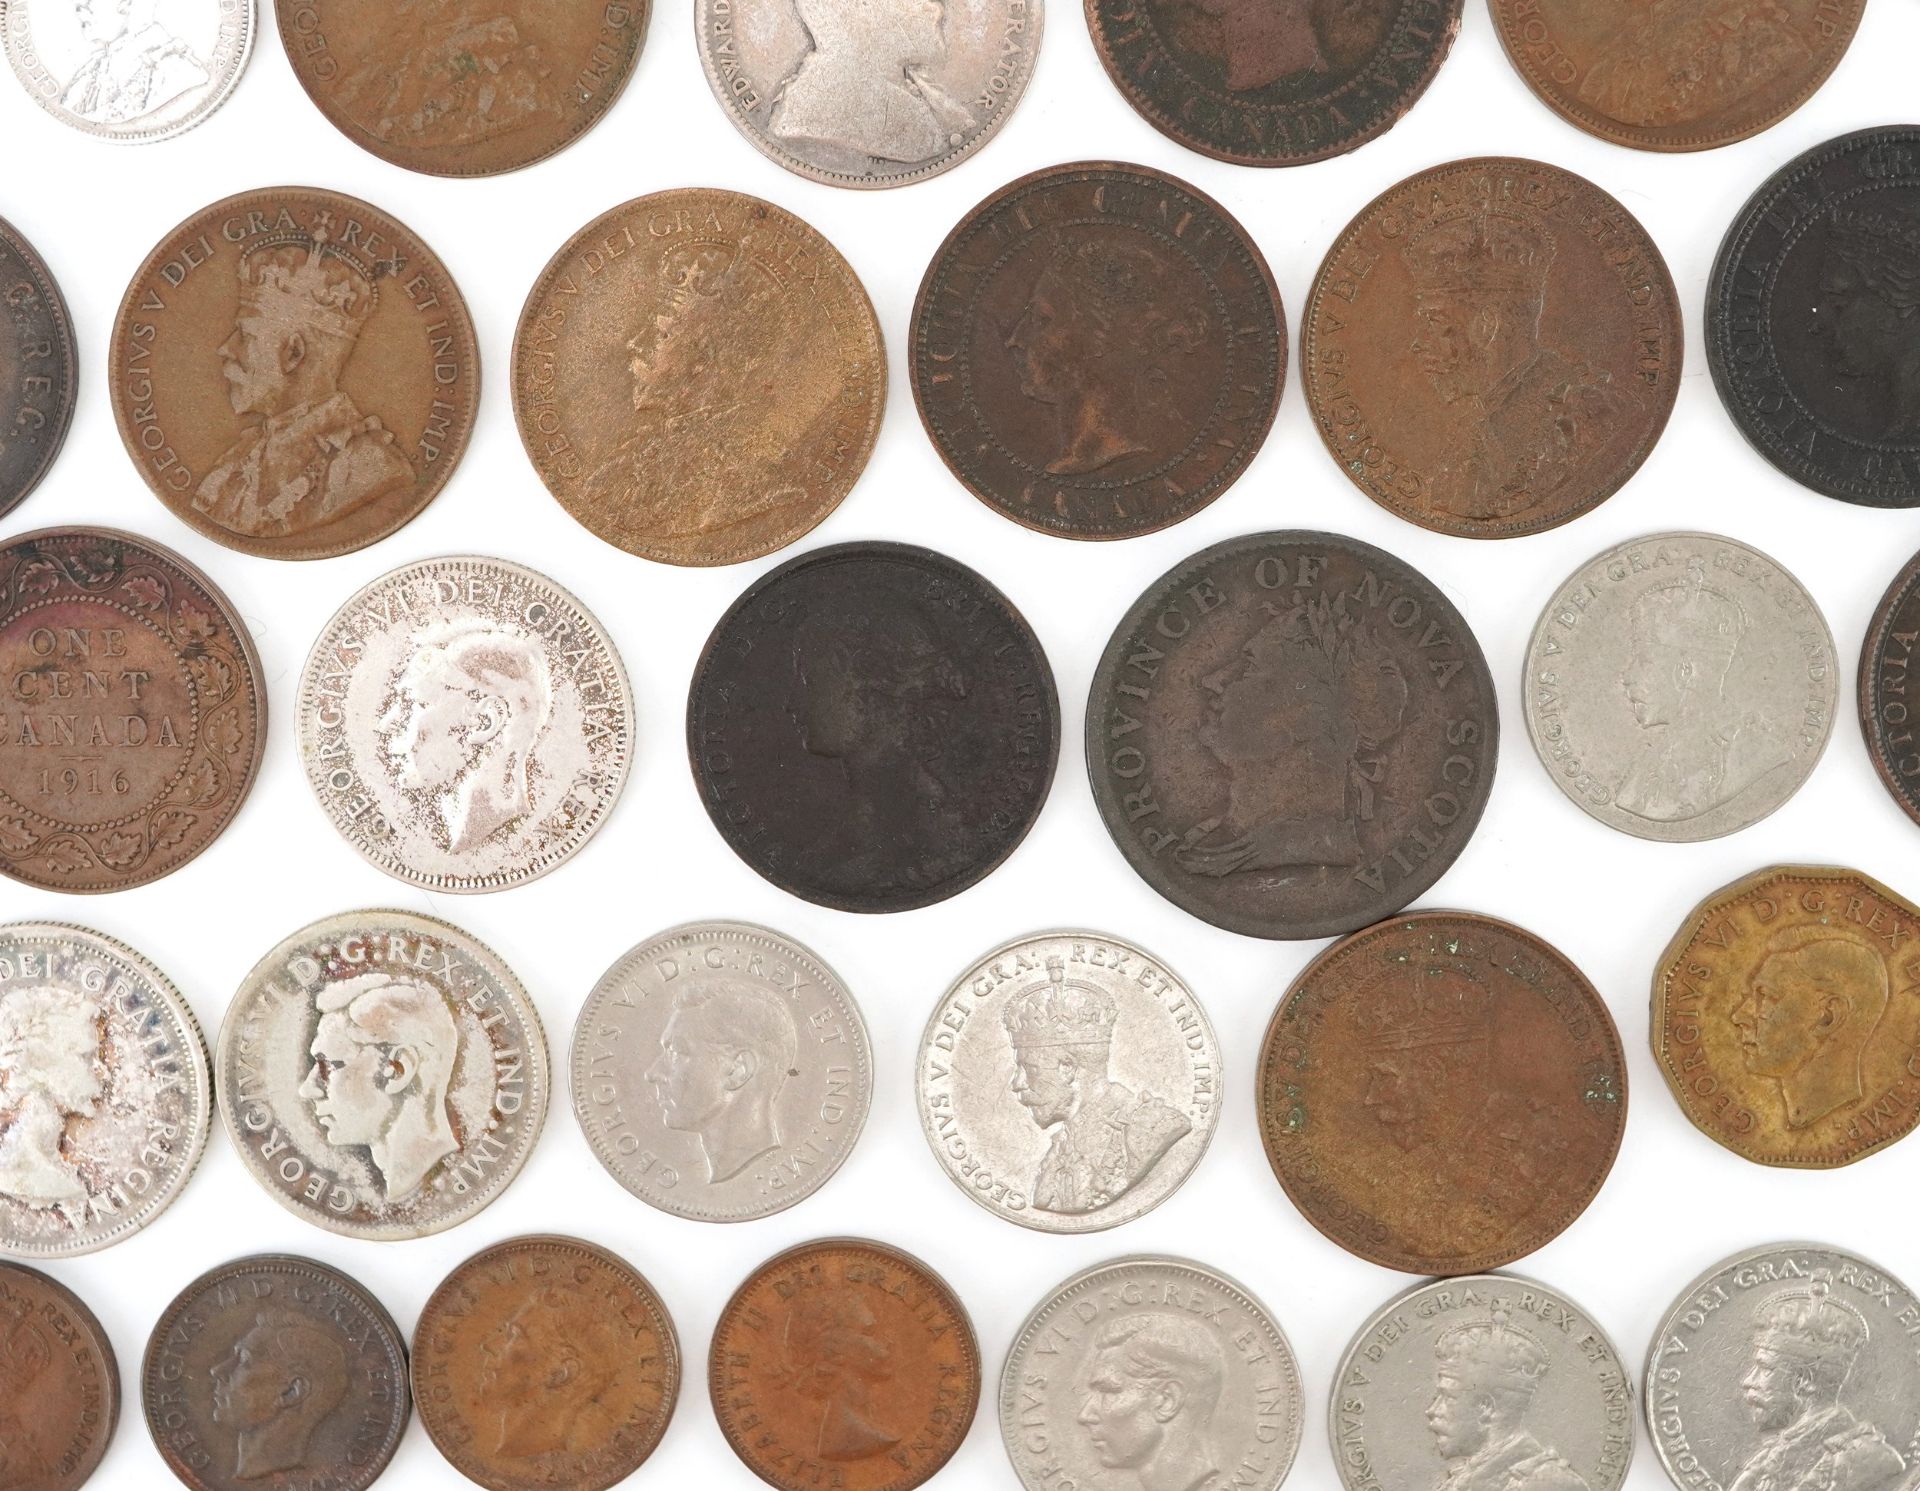 Early 19th century and later Canadian coinage and tokens including Nova Scotia one penny tokens, - Image 16 of 20